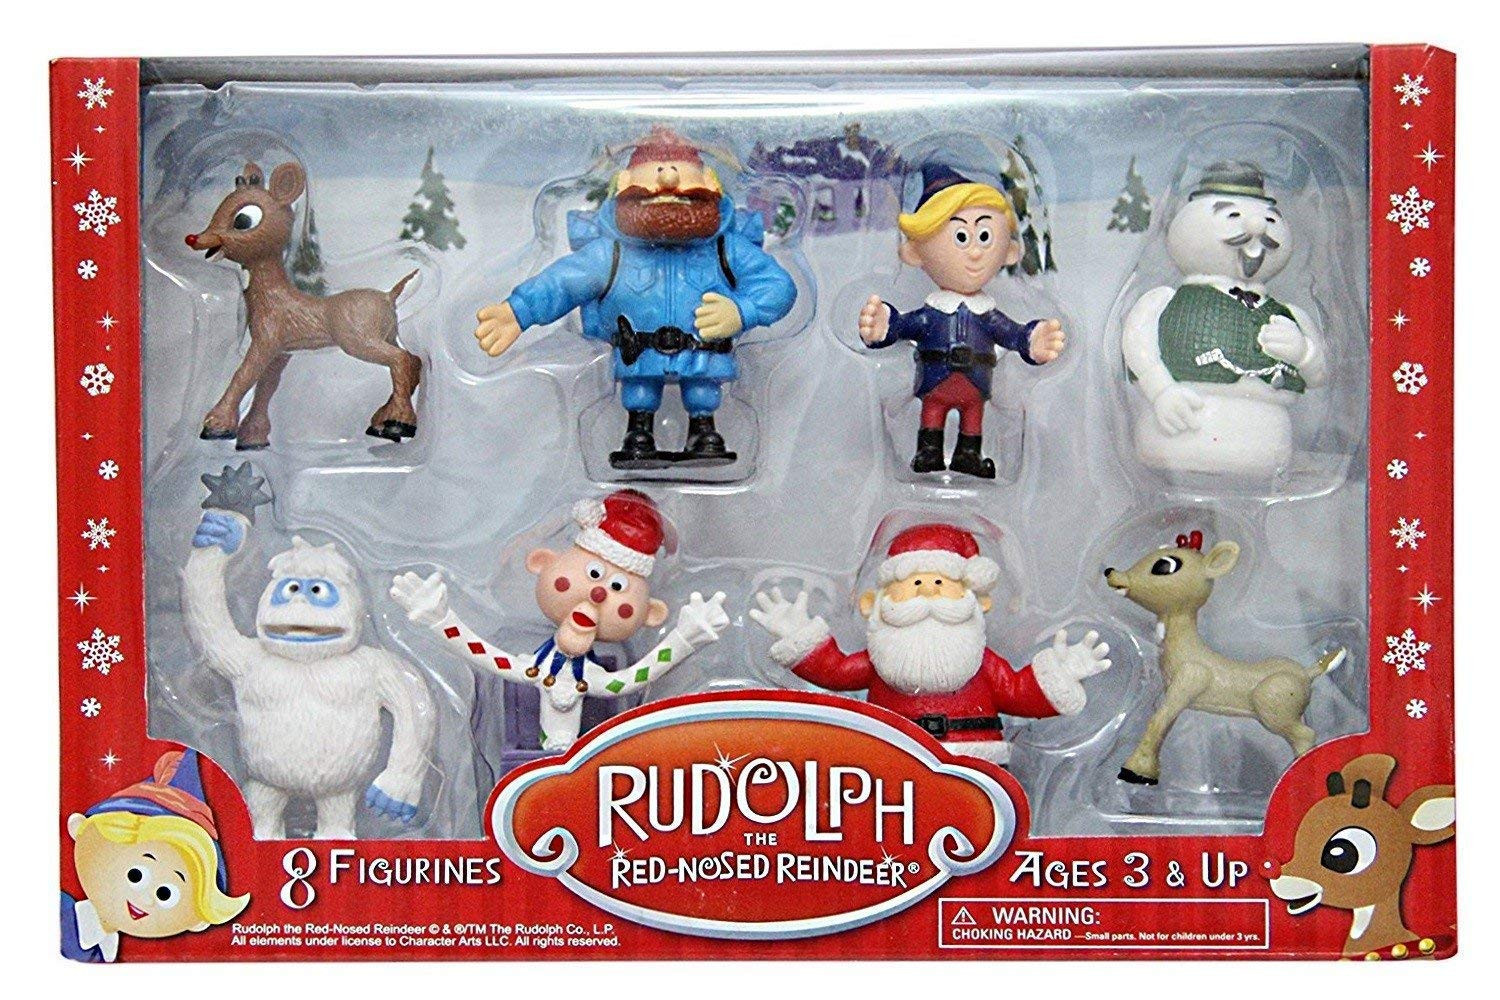 Rudolph The Red Nosed Reindeer Figurine Set 8pc Set Including 2 Figures Of Rudolph Yukon Cornelius Hermey Bumble The Abominable Snowman Sam The